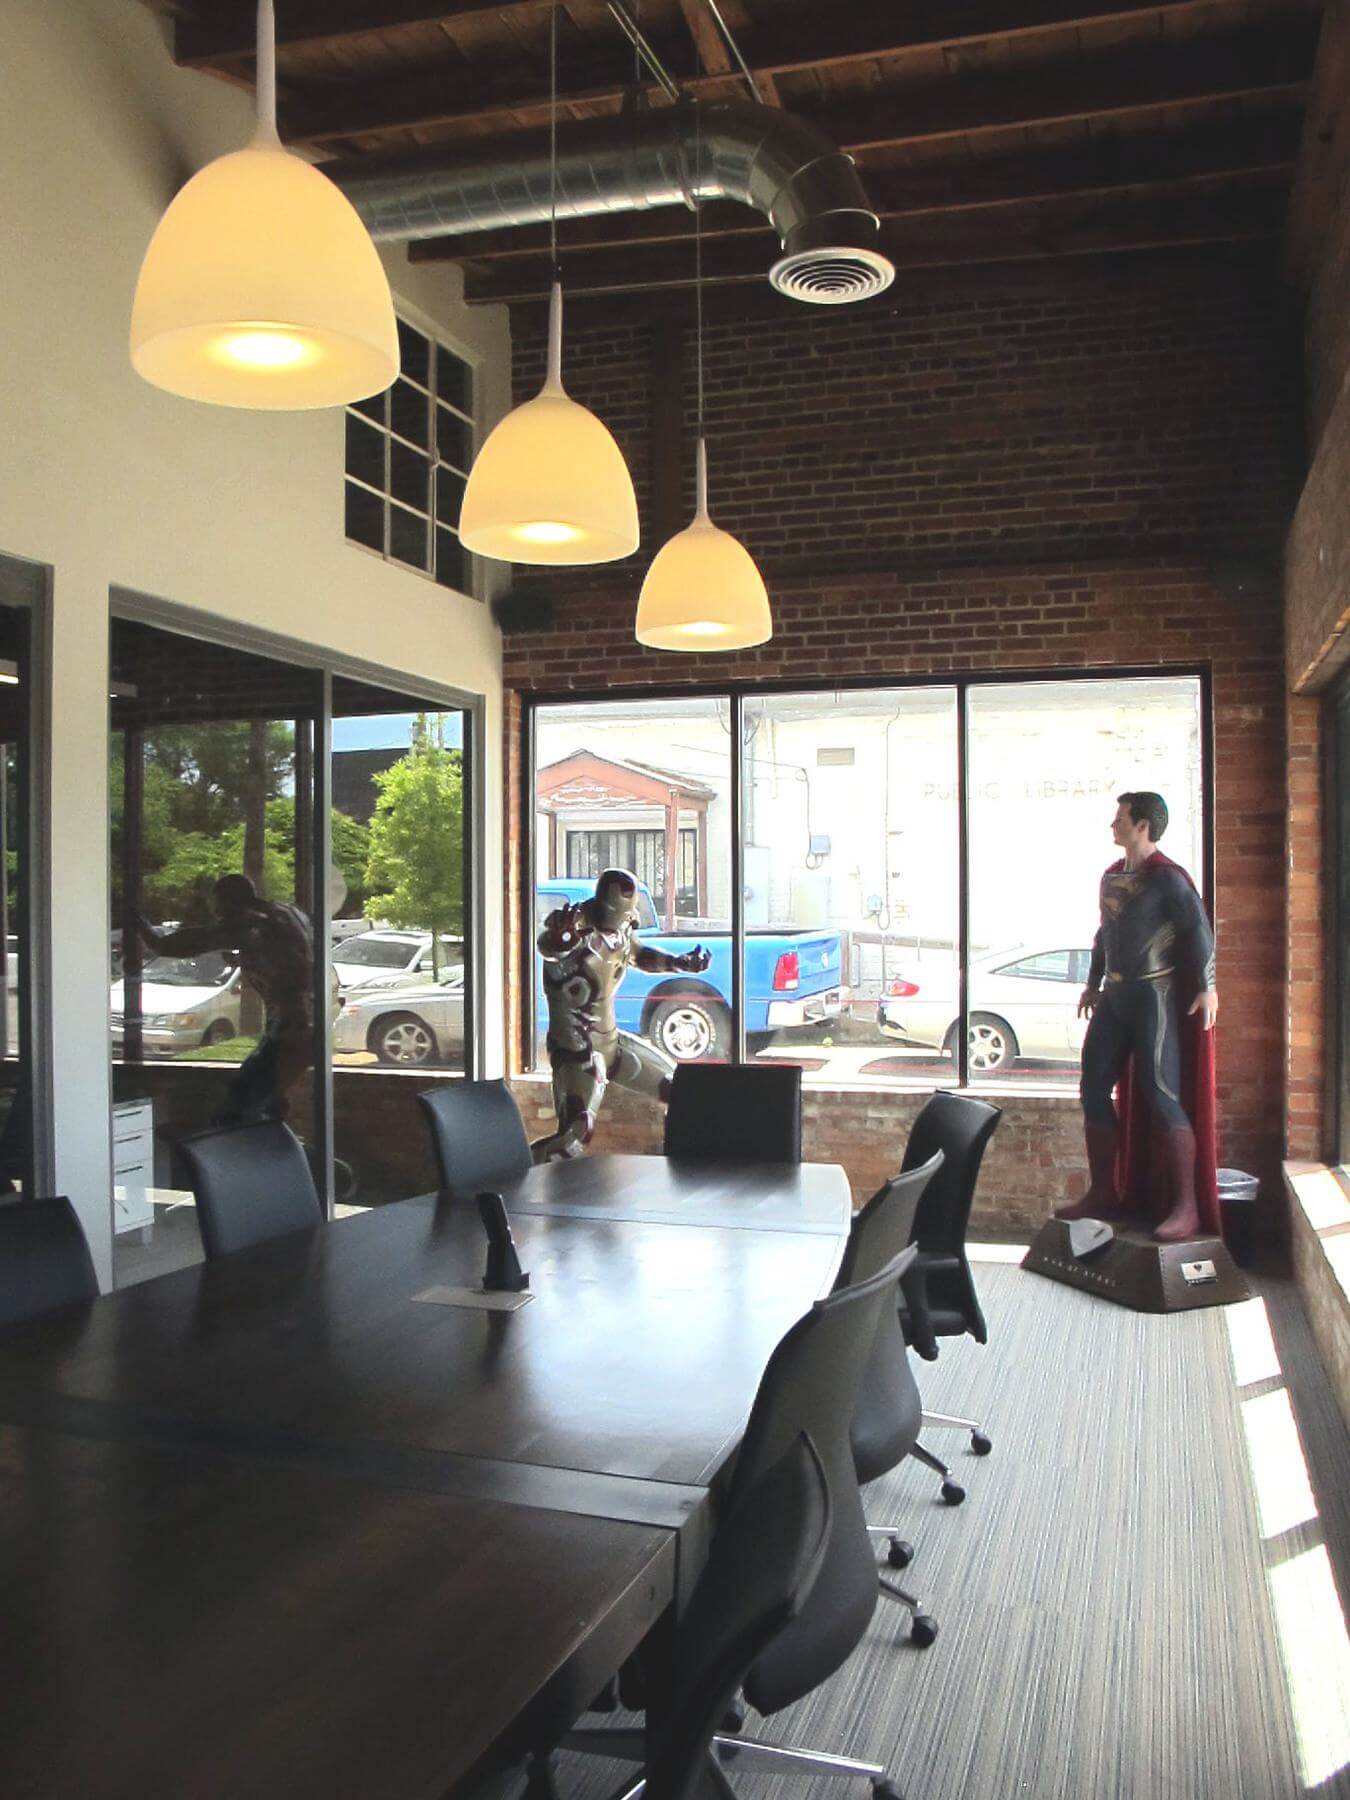 High ceilings with wooden beams exposed brick modern lighting and life-size comic book heroes lend personality to this inviting light-filled corner conference room 